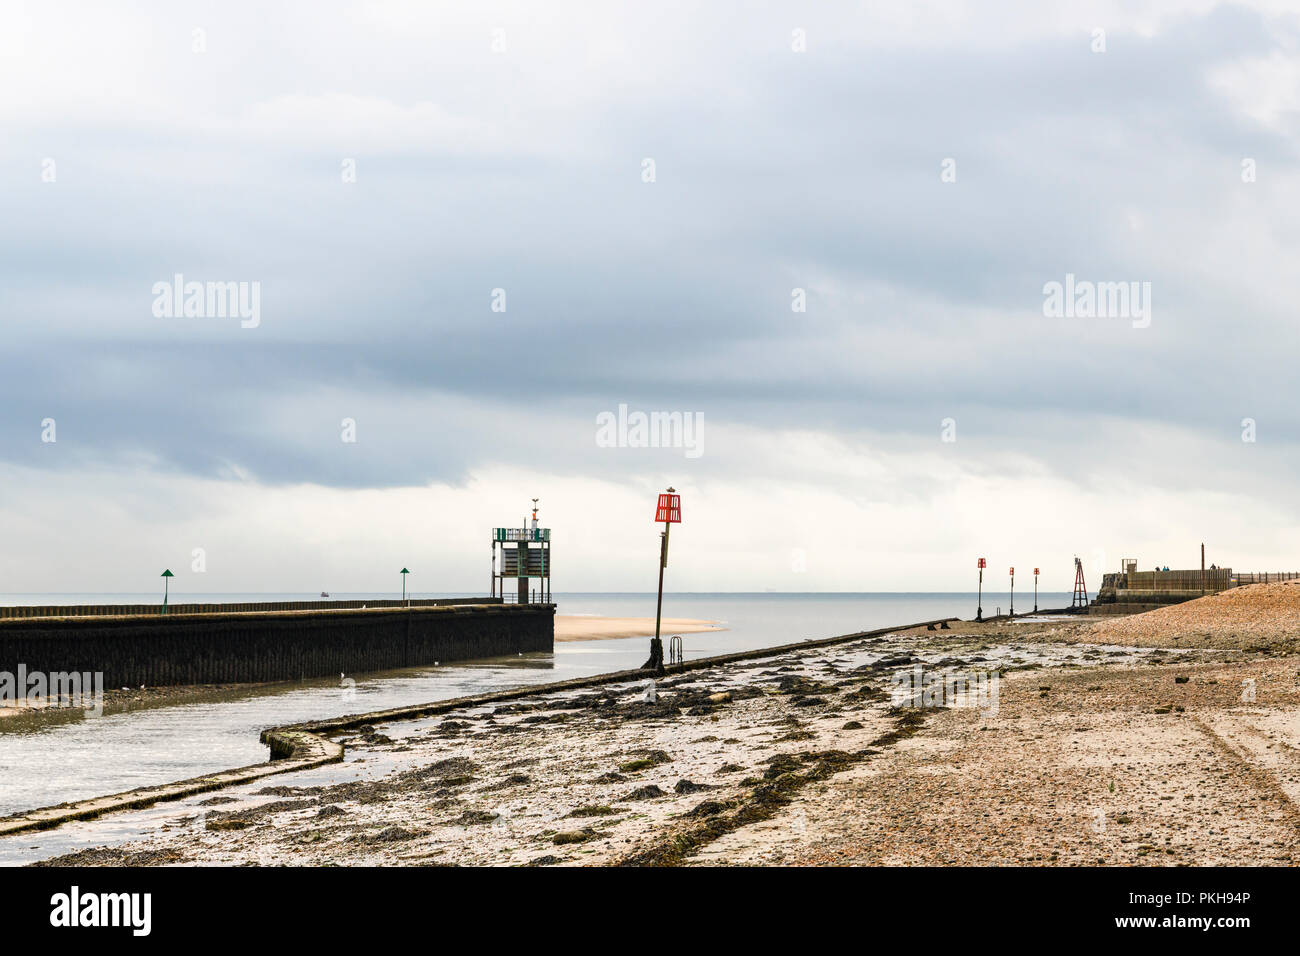 The entrance to Rye Harbour at low tide along the River Rother, East Sussex, England. 30 August 2018 Stock Photo